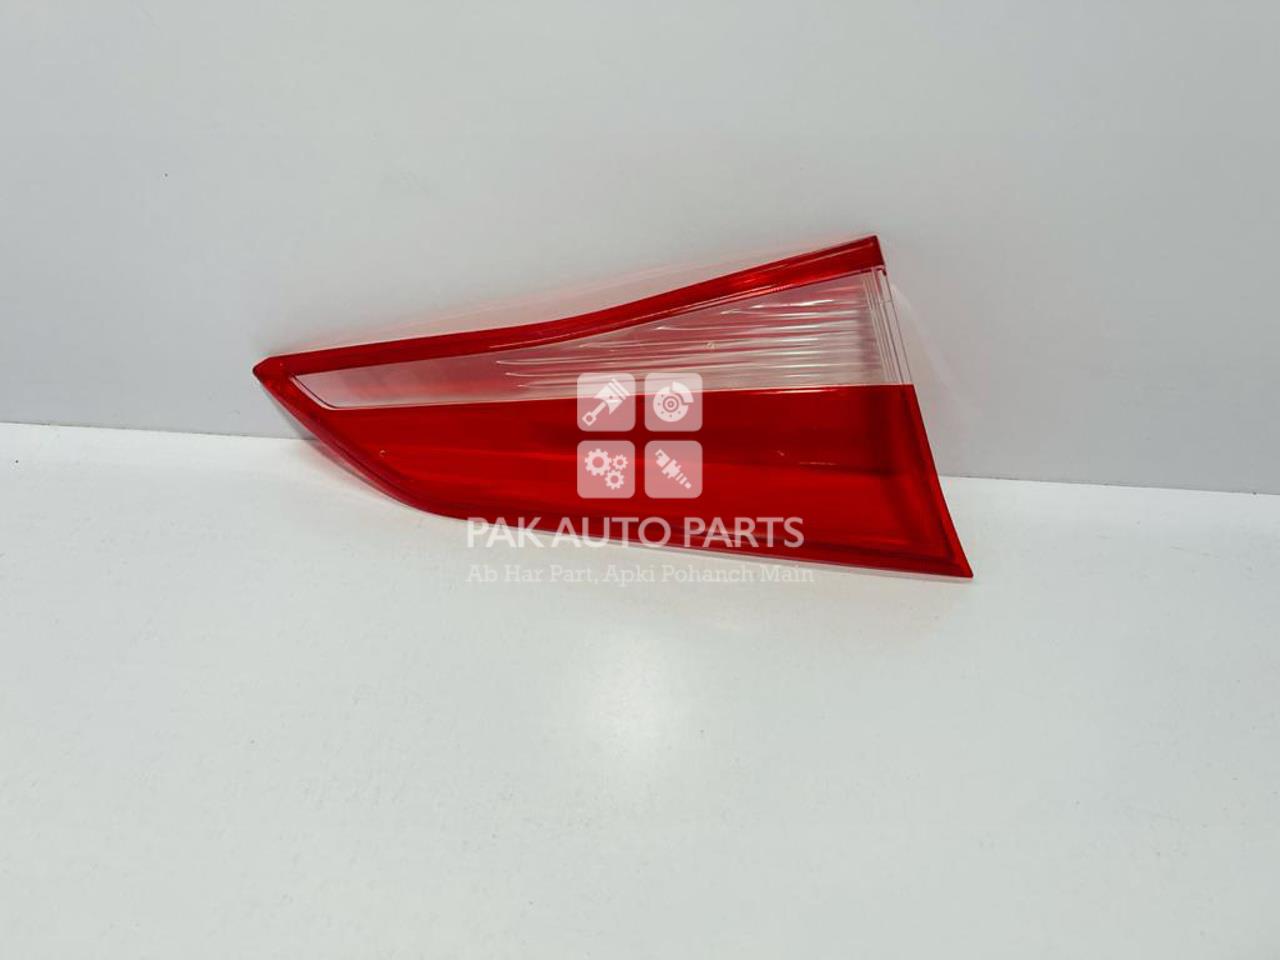 Picture of Toyota Yaris Tail Light (Backlight) Inner Cover